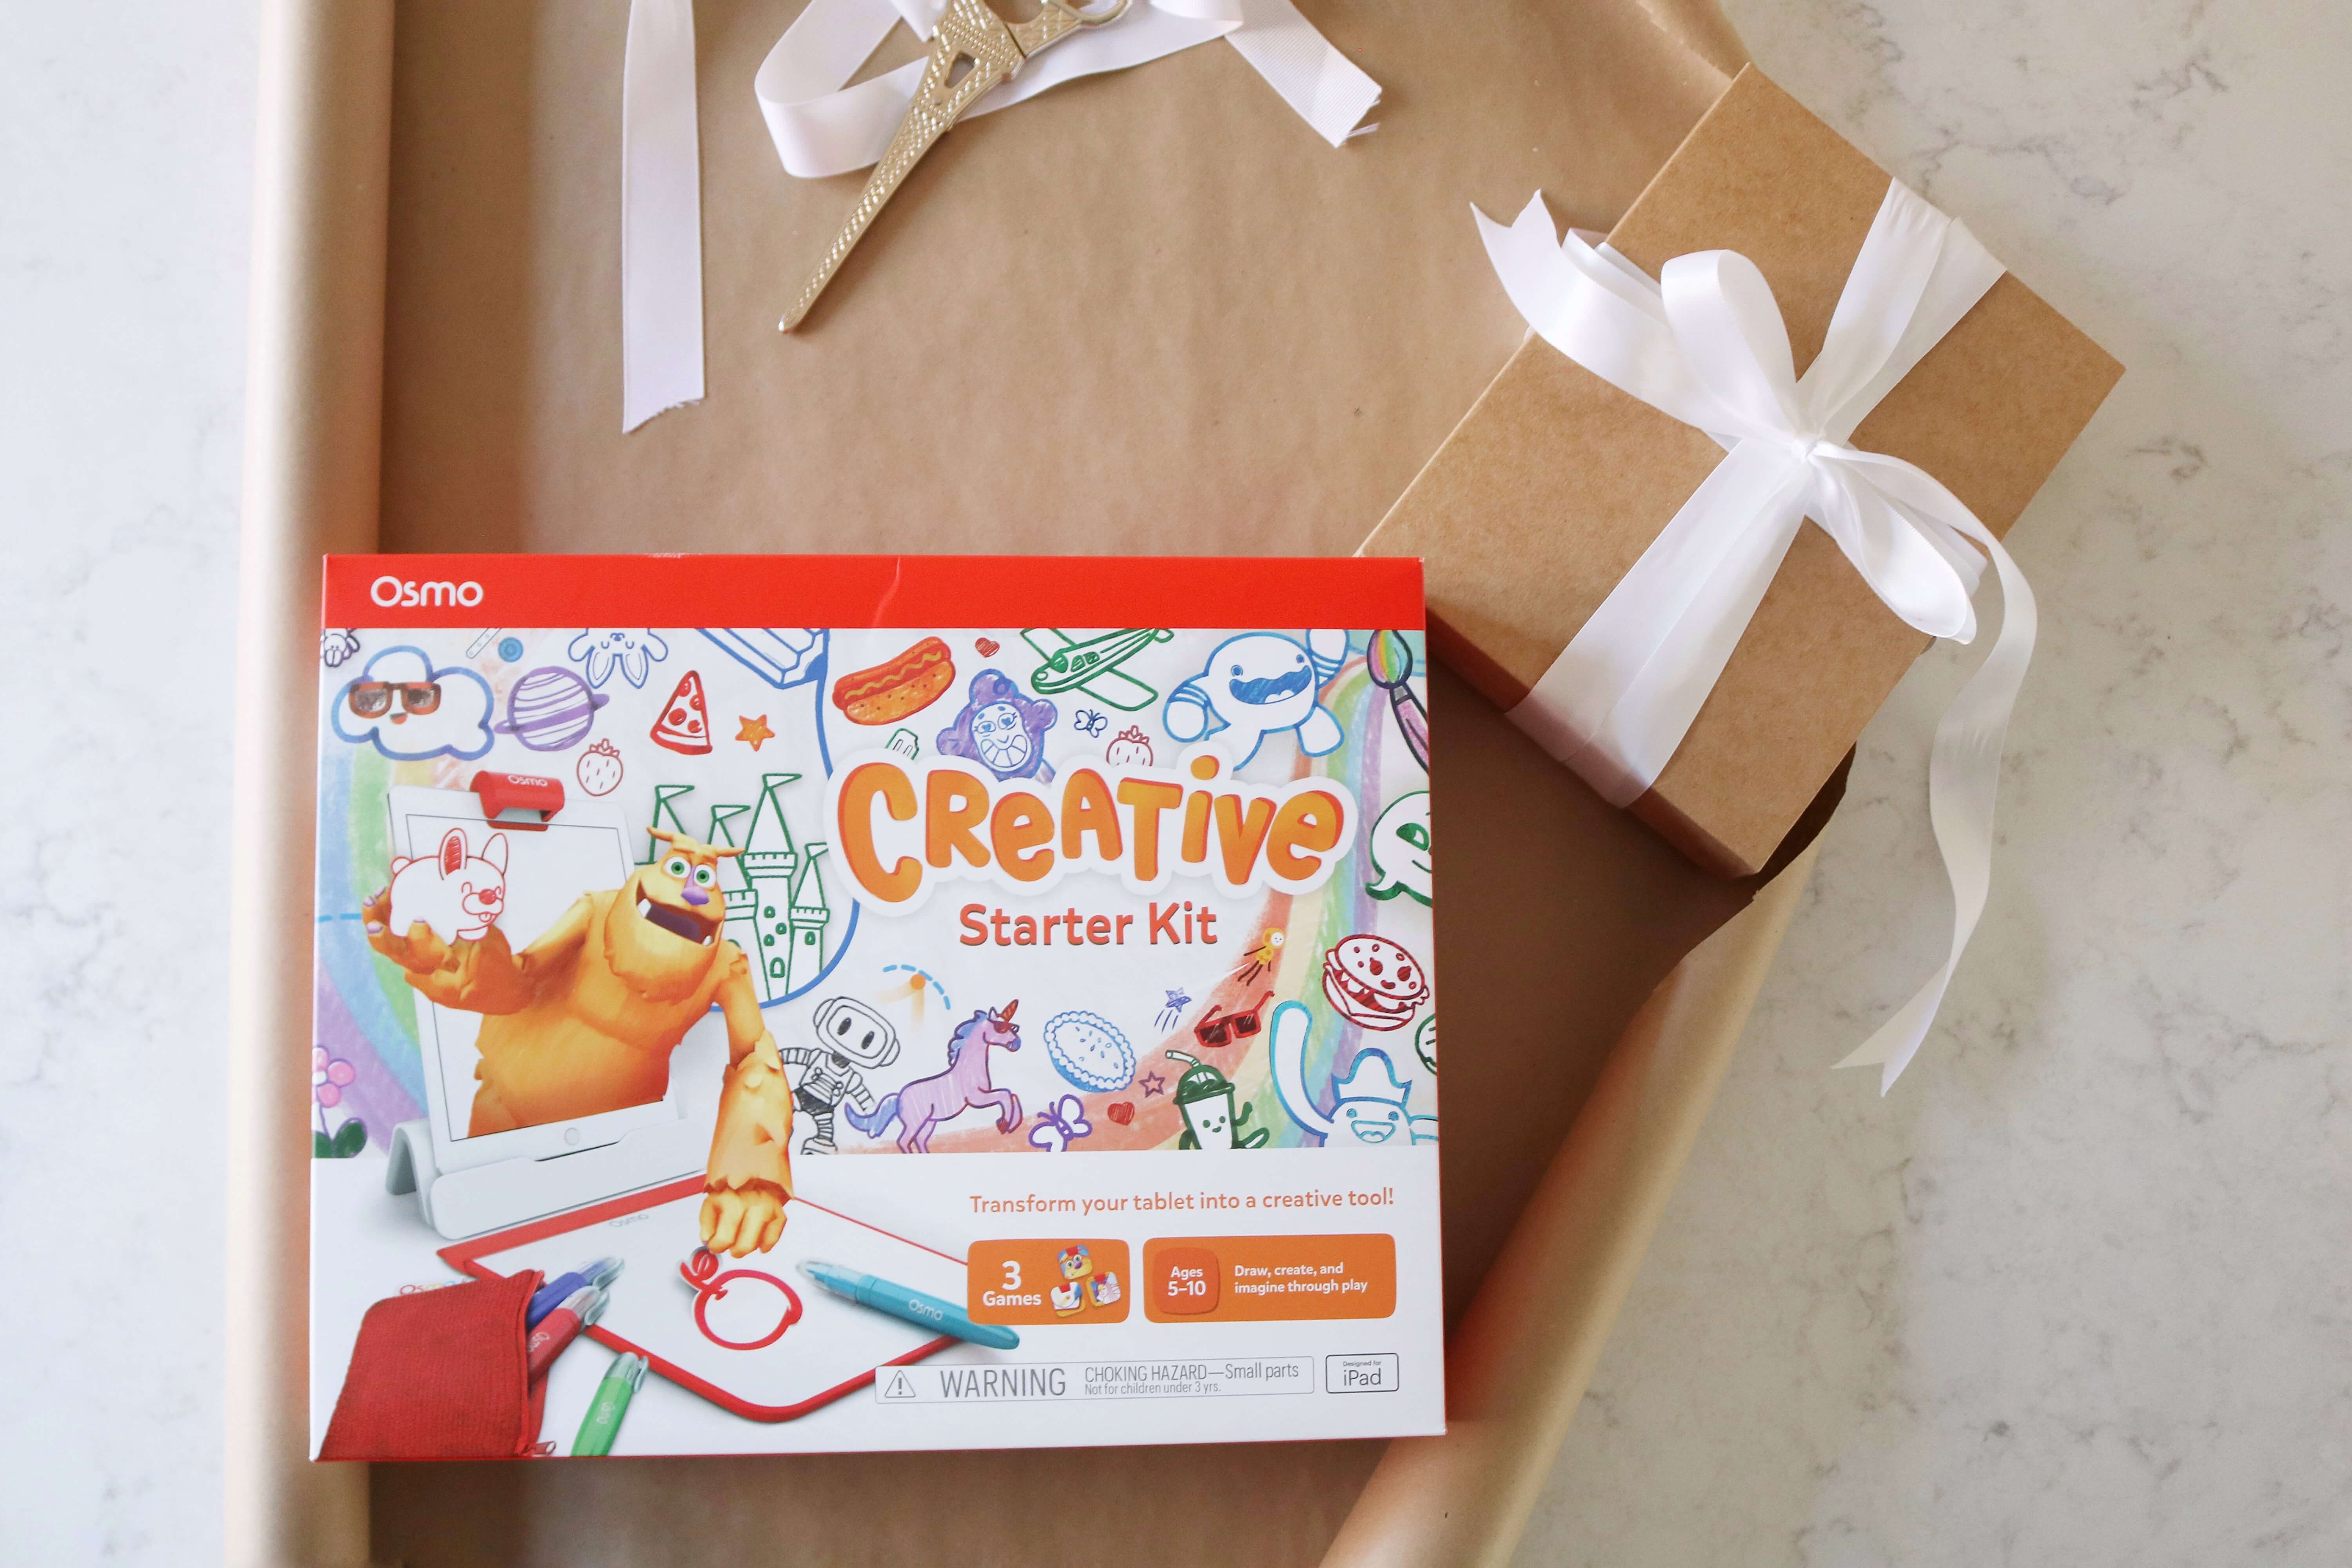 Review of the Osmo Creative Creative Starter Kit